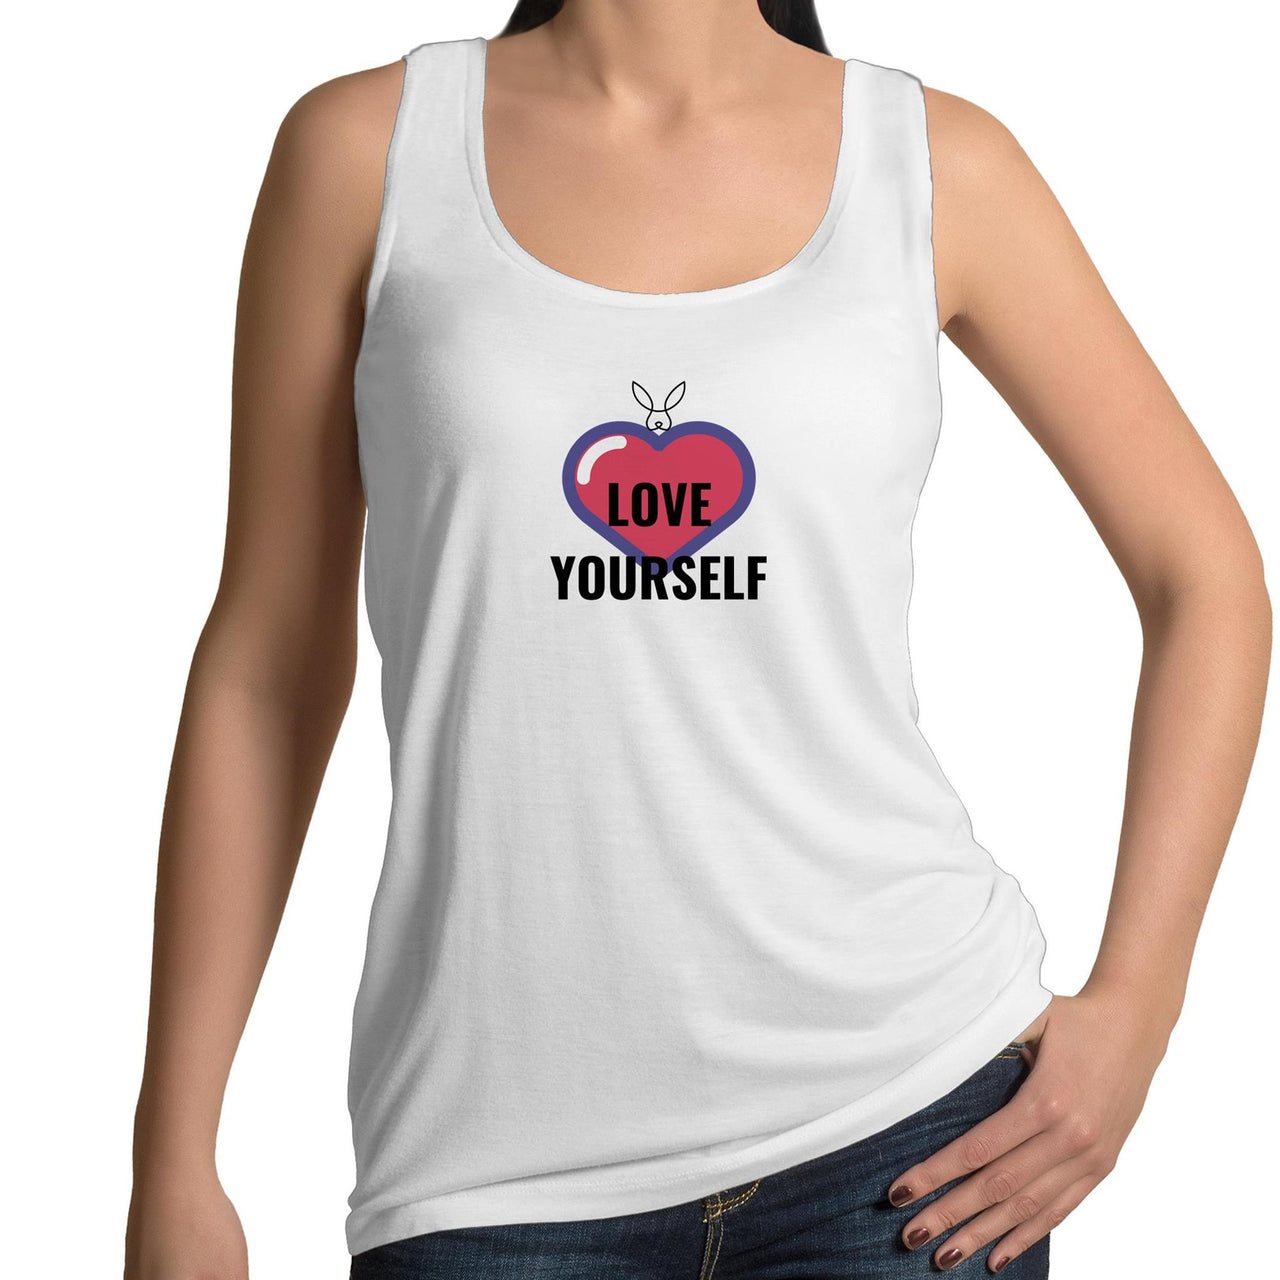 Love Yourself Singlet by CBF Clothing White 